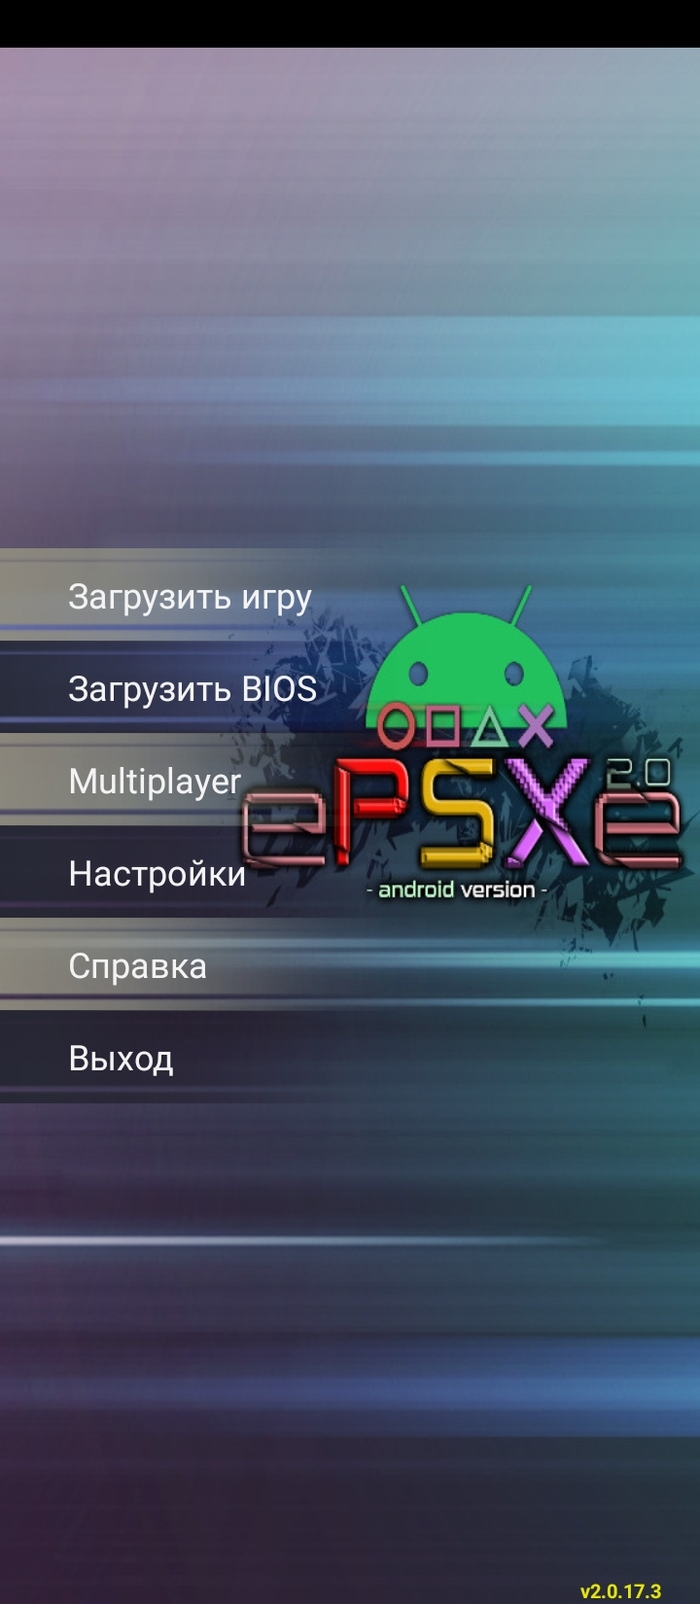       ! =)  ,  , Android, , Playstation,   Android, -, 